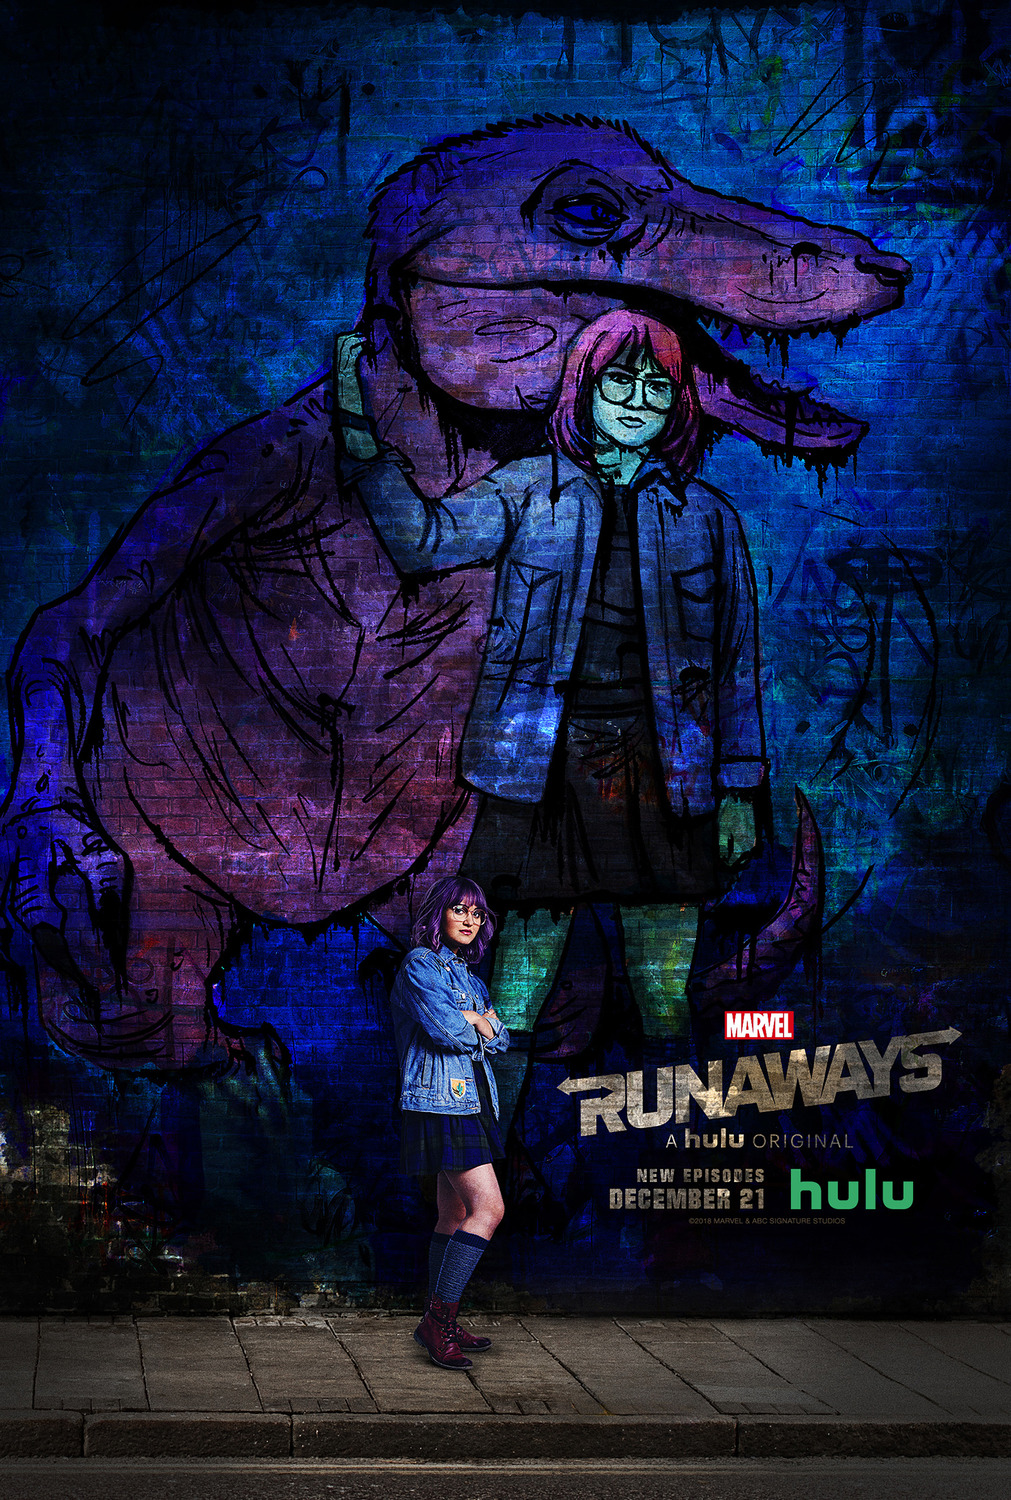 Extra Large TV Poster Image for Runaways (#15 of 28)